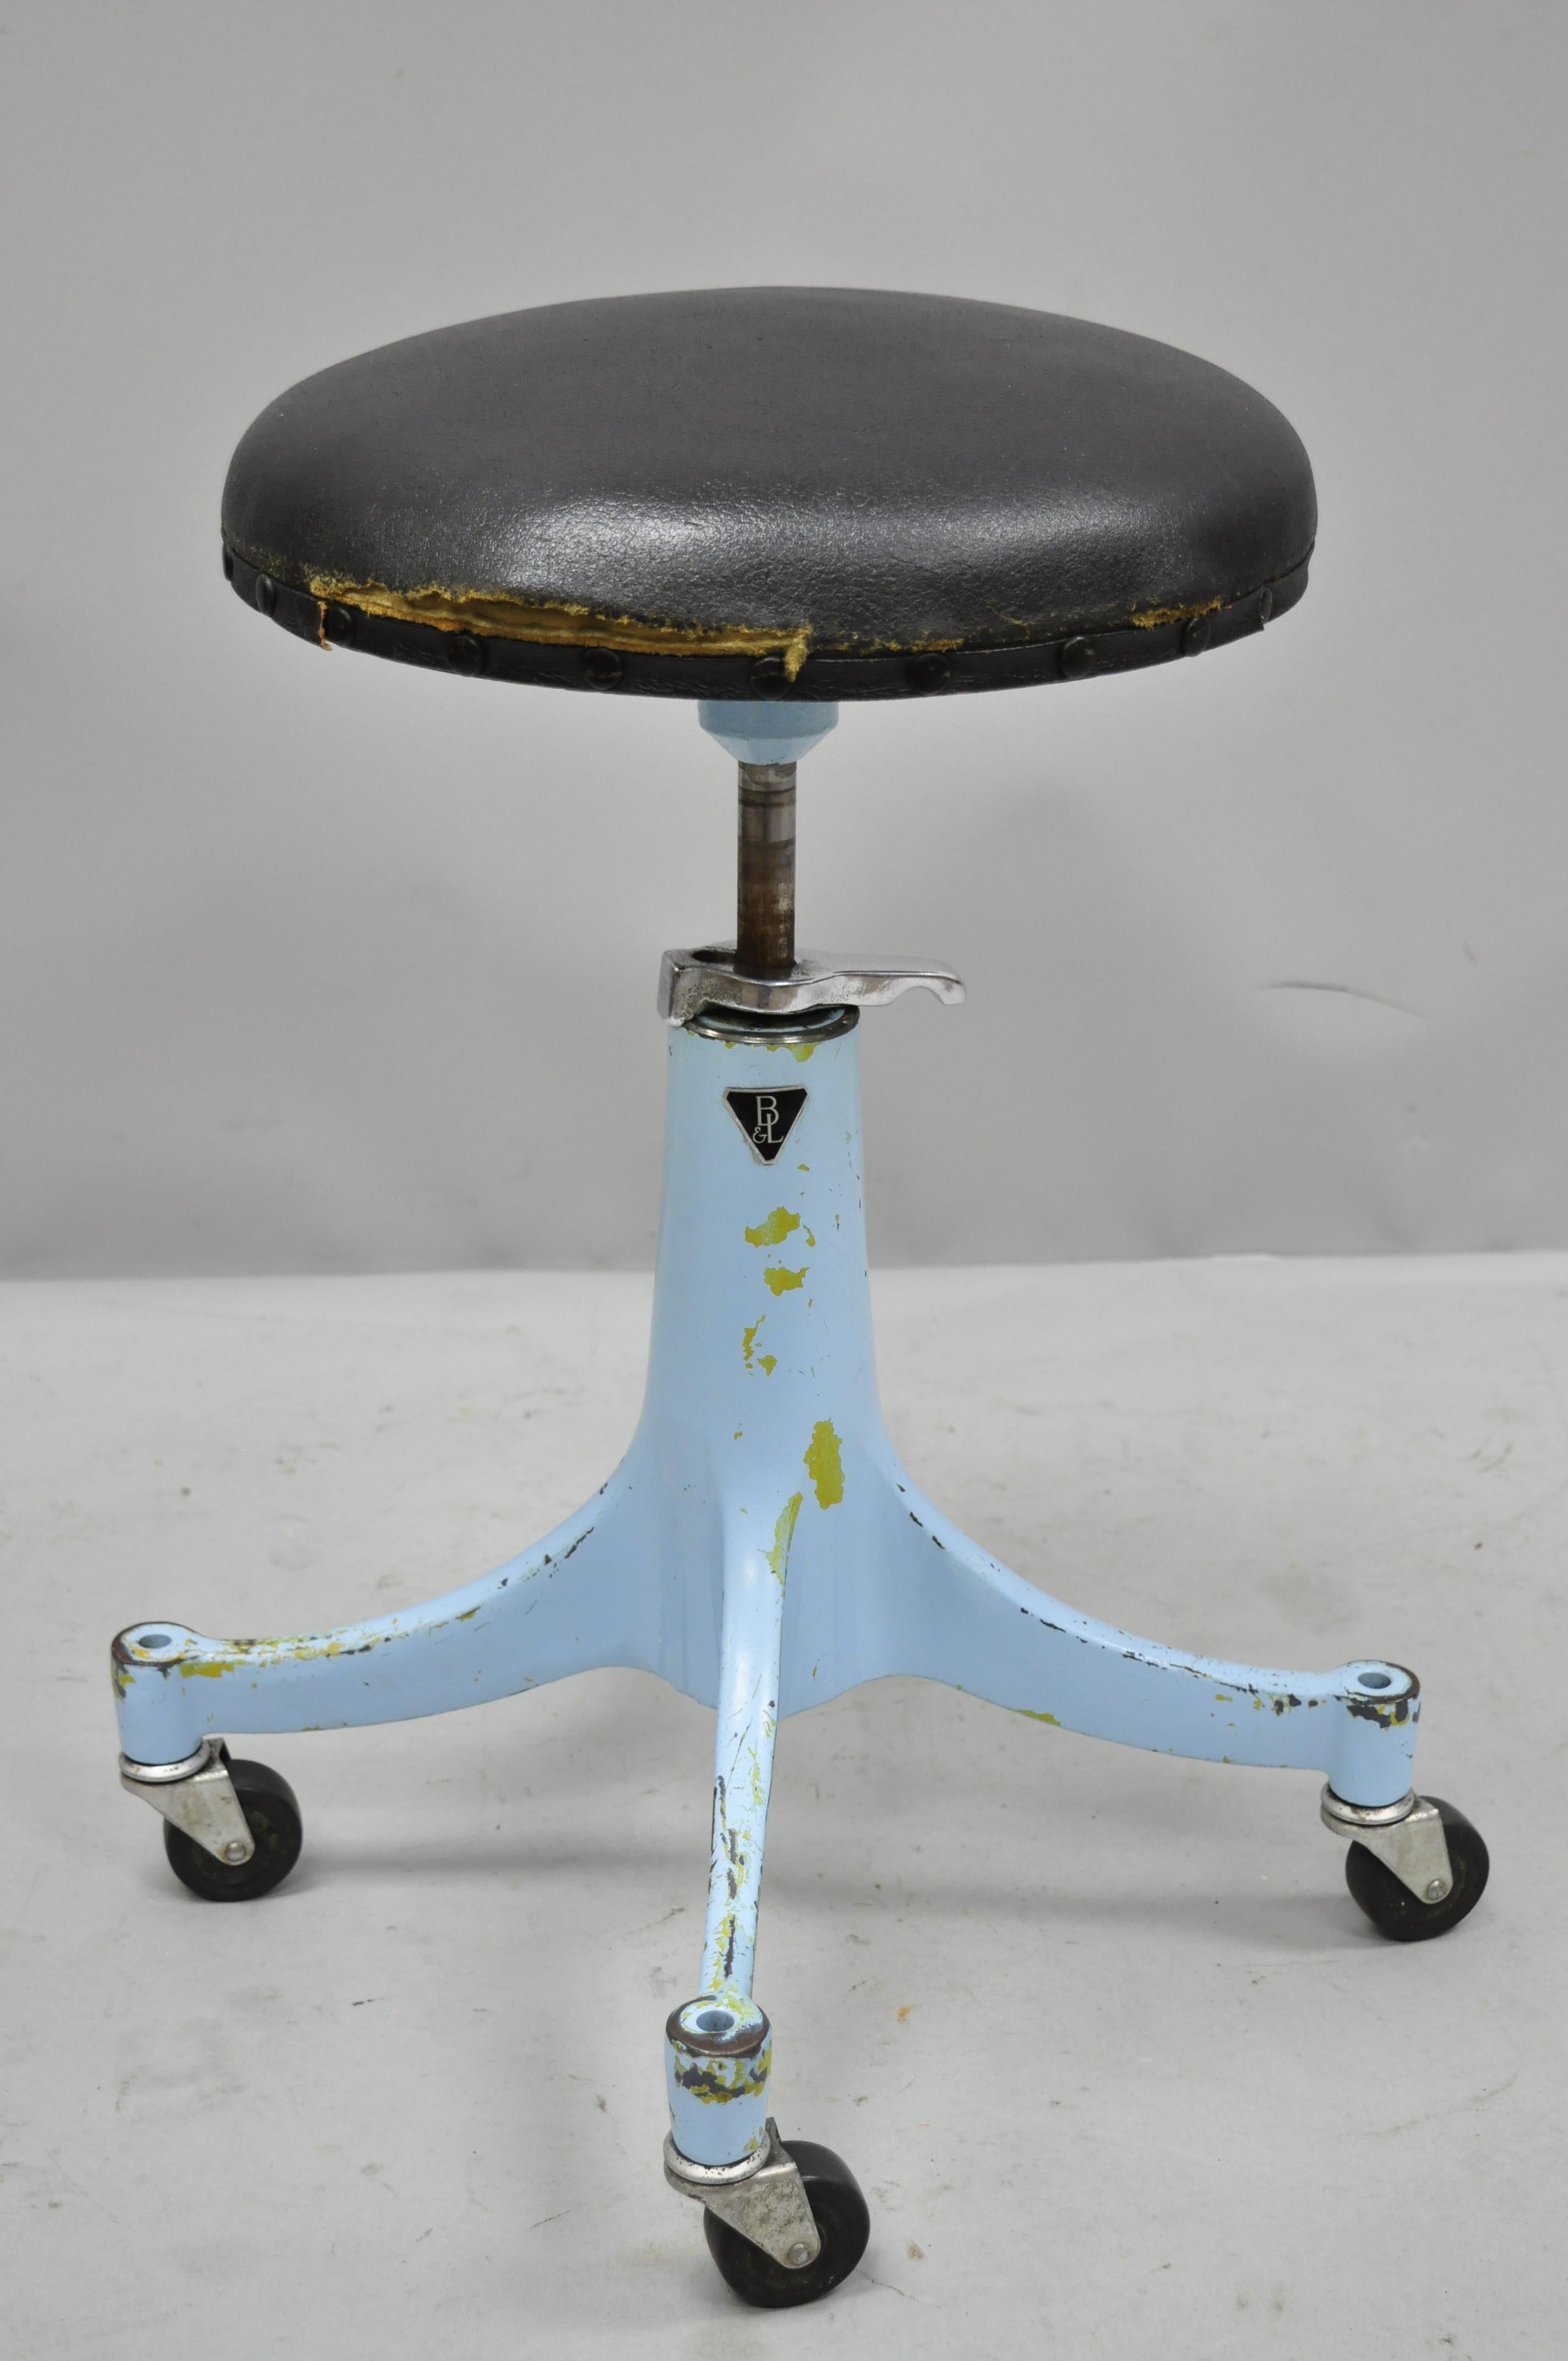 Antique 1930s Bausch & Lomb optical blue industrial medical adjustable stool. Item features adjustable height, cast iron base, wooden seat with black vinyl upholstery, rolling casters, blue finish, original label, very nice antique item, quality